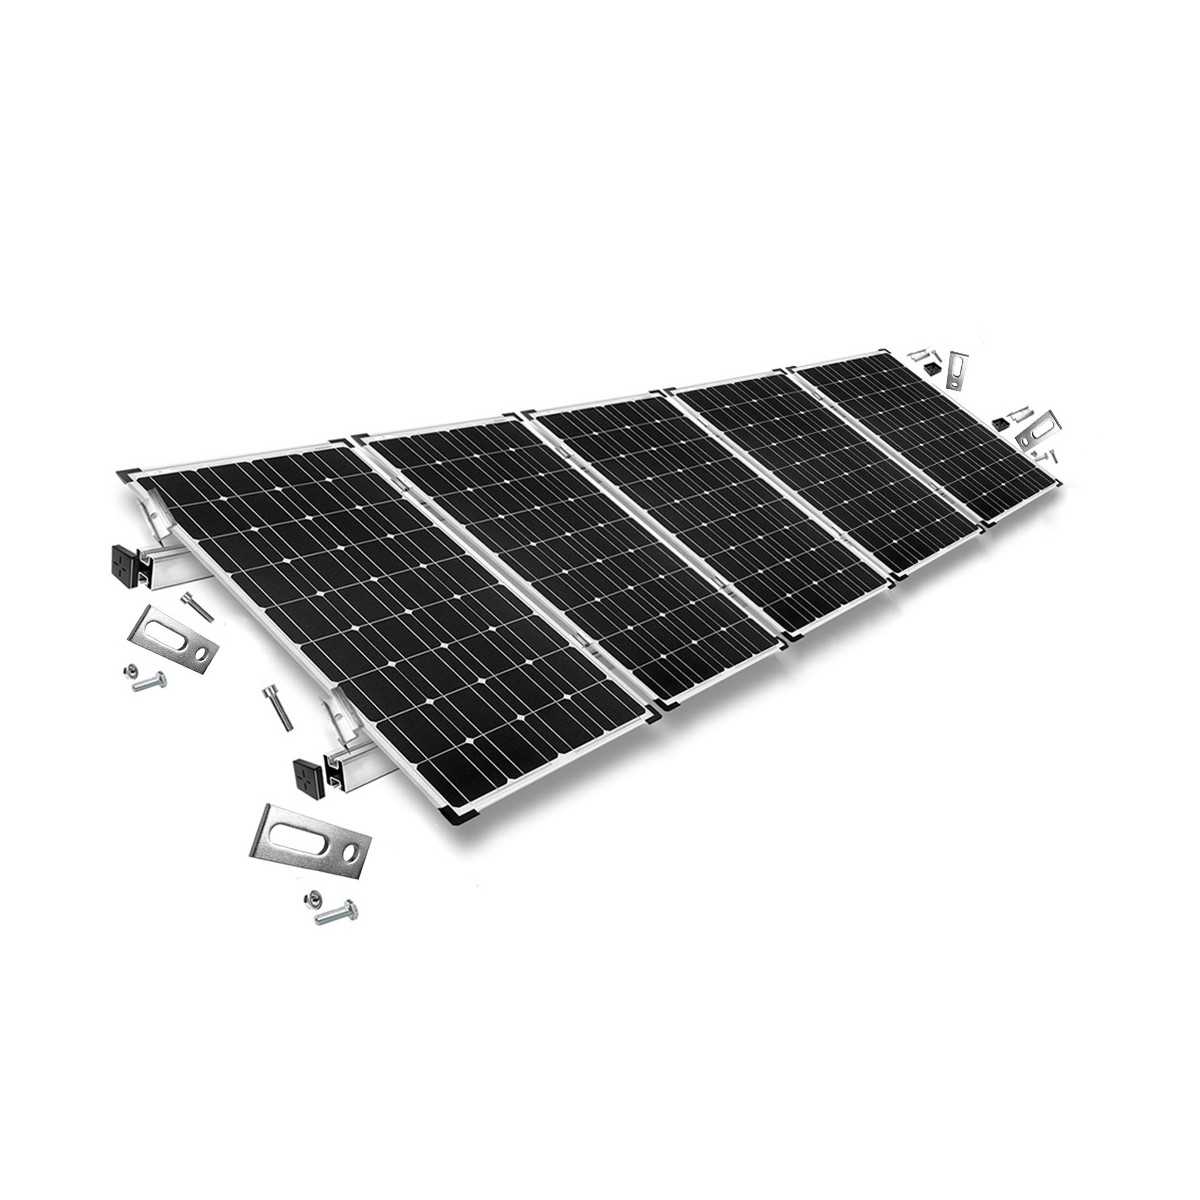 Mounting kit h35 with roof studs for pitched roof 5 solar panels frame 35 mm